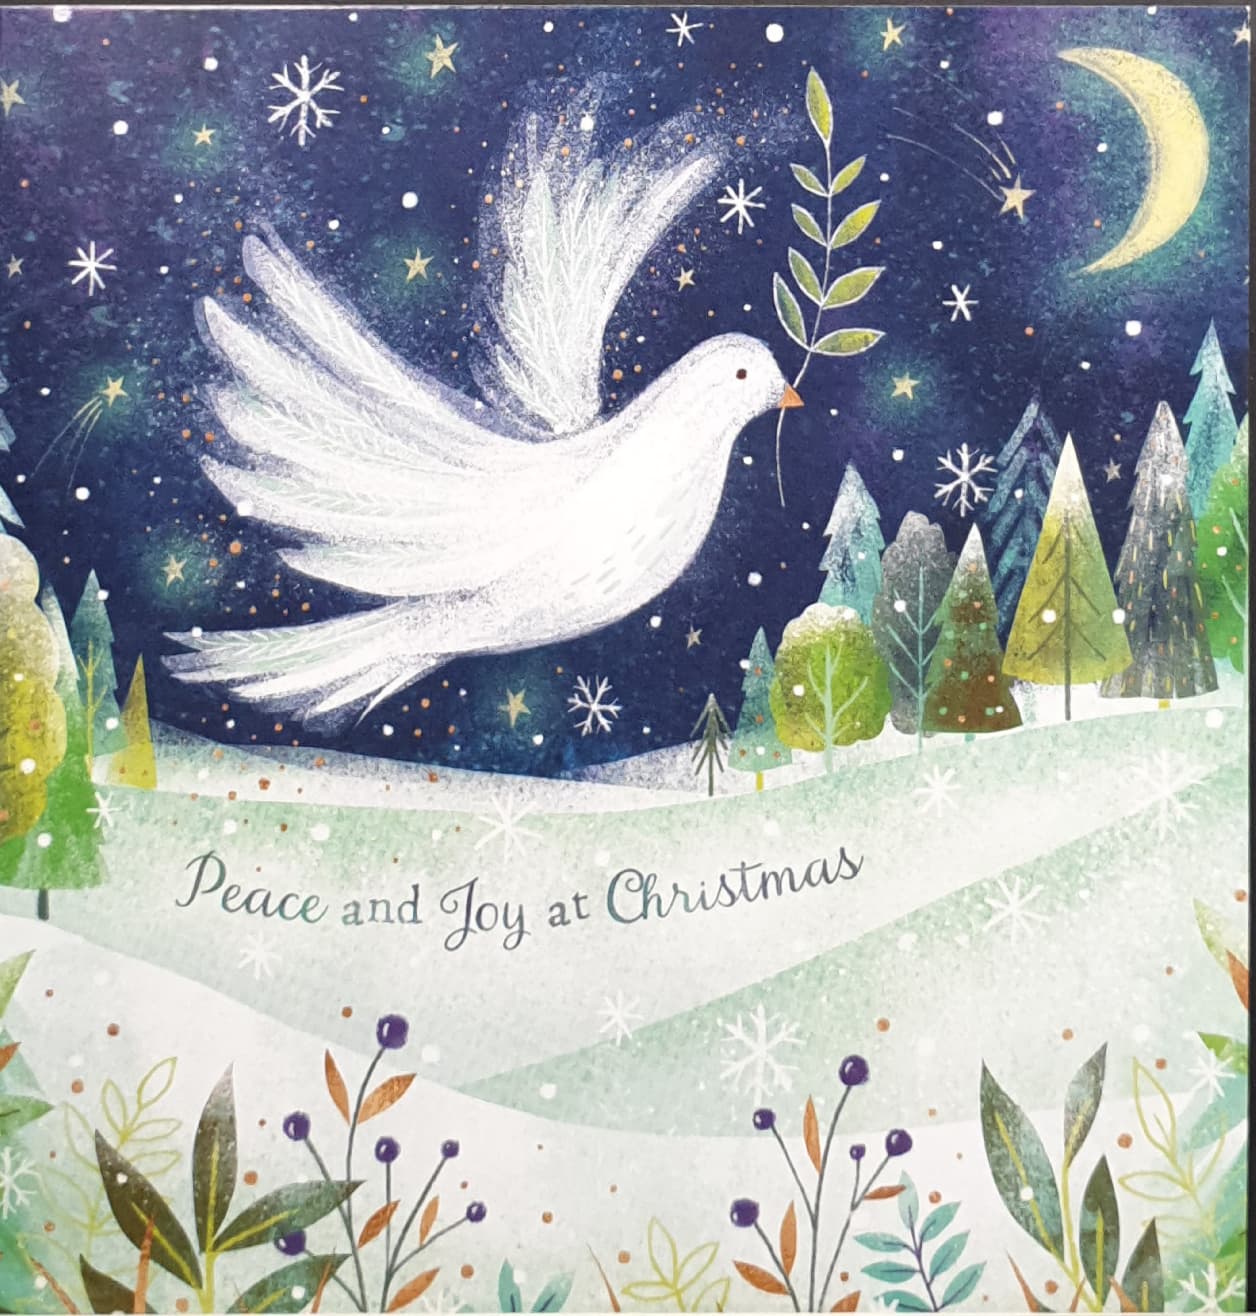 Charity Christmas Card - Pack of 8 Large Size / Northern Ireland Hospice - Dove in Night Sky